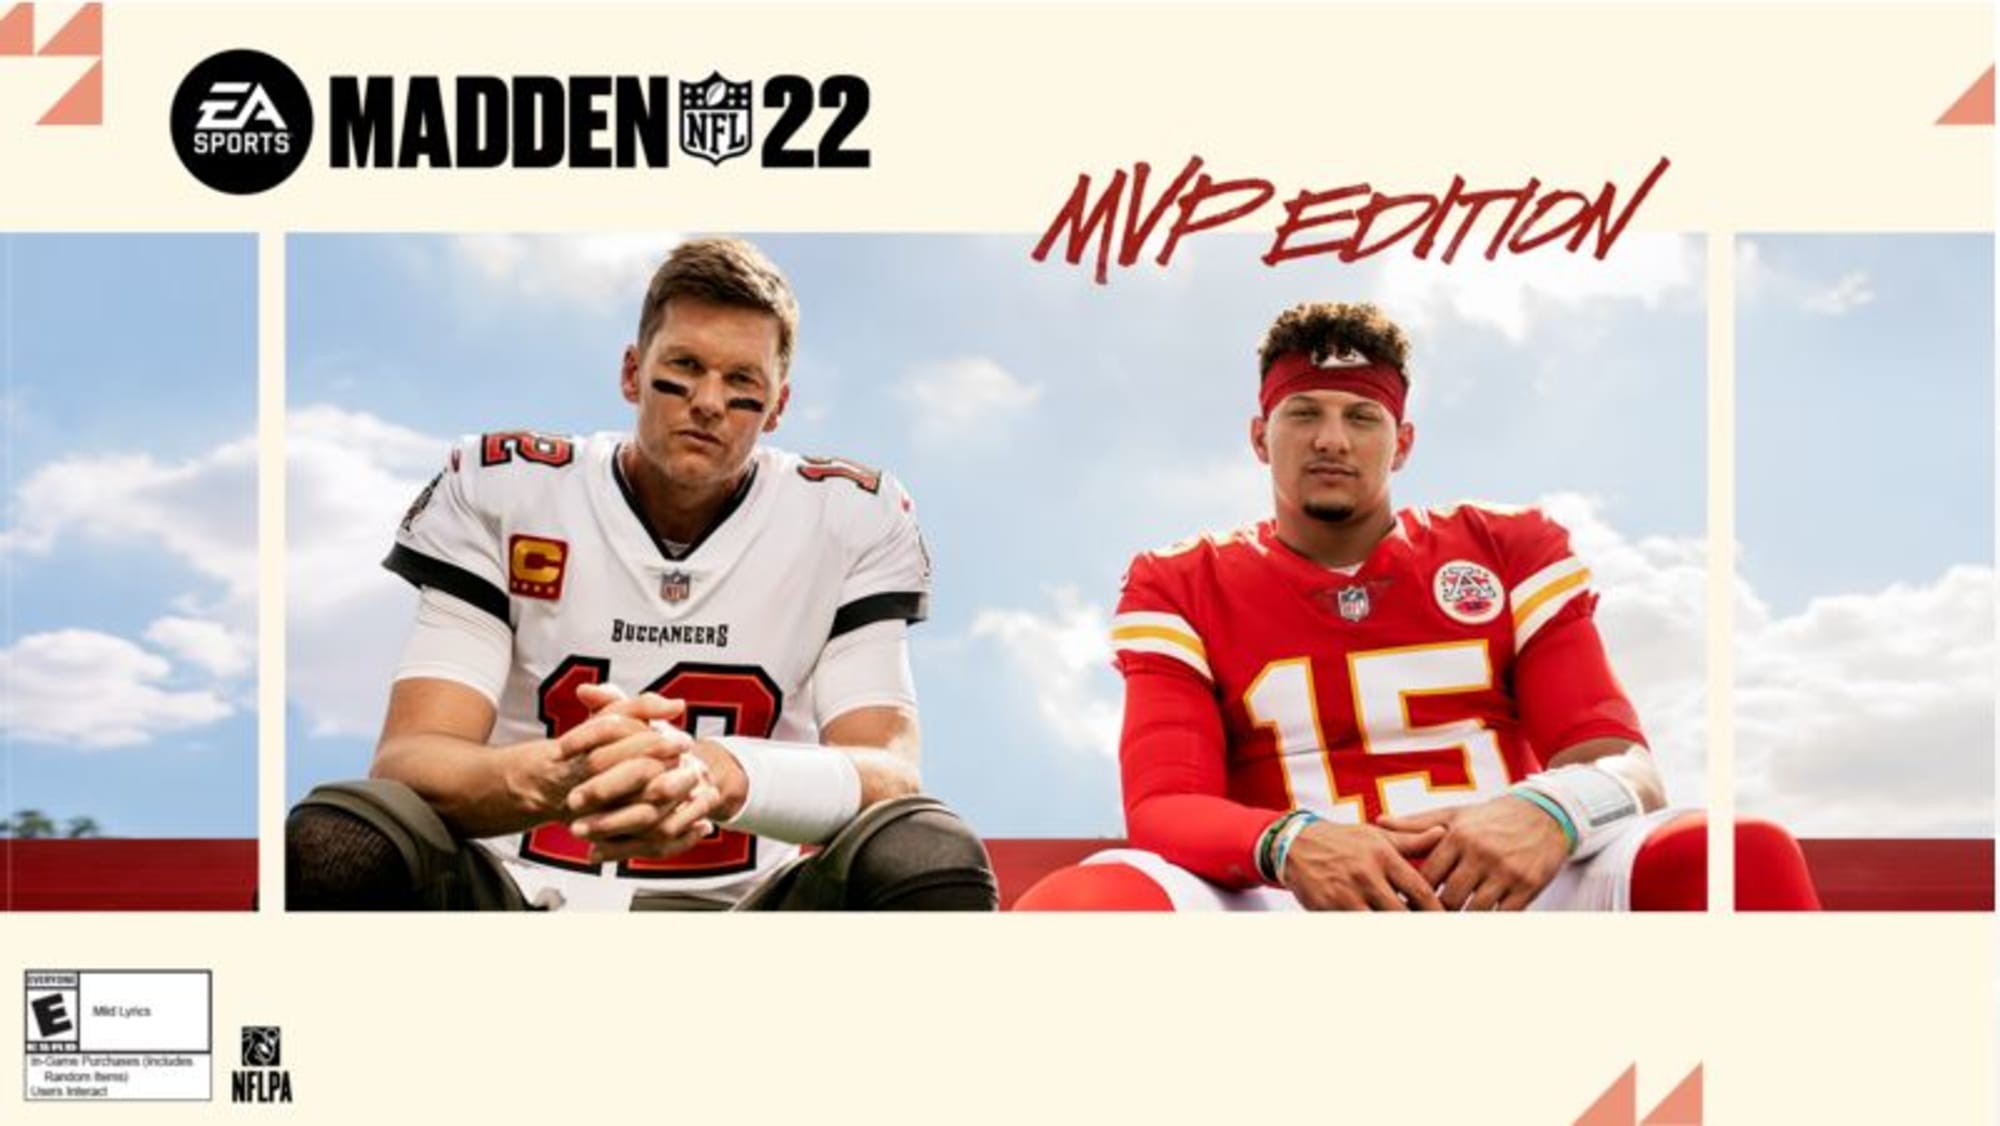 Tom Brady And Patrick Mahomes On The Cover Of Madden 22